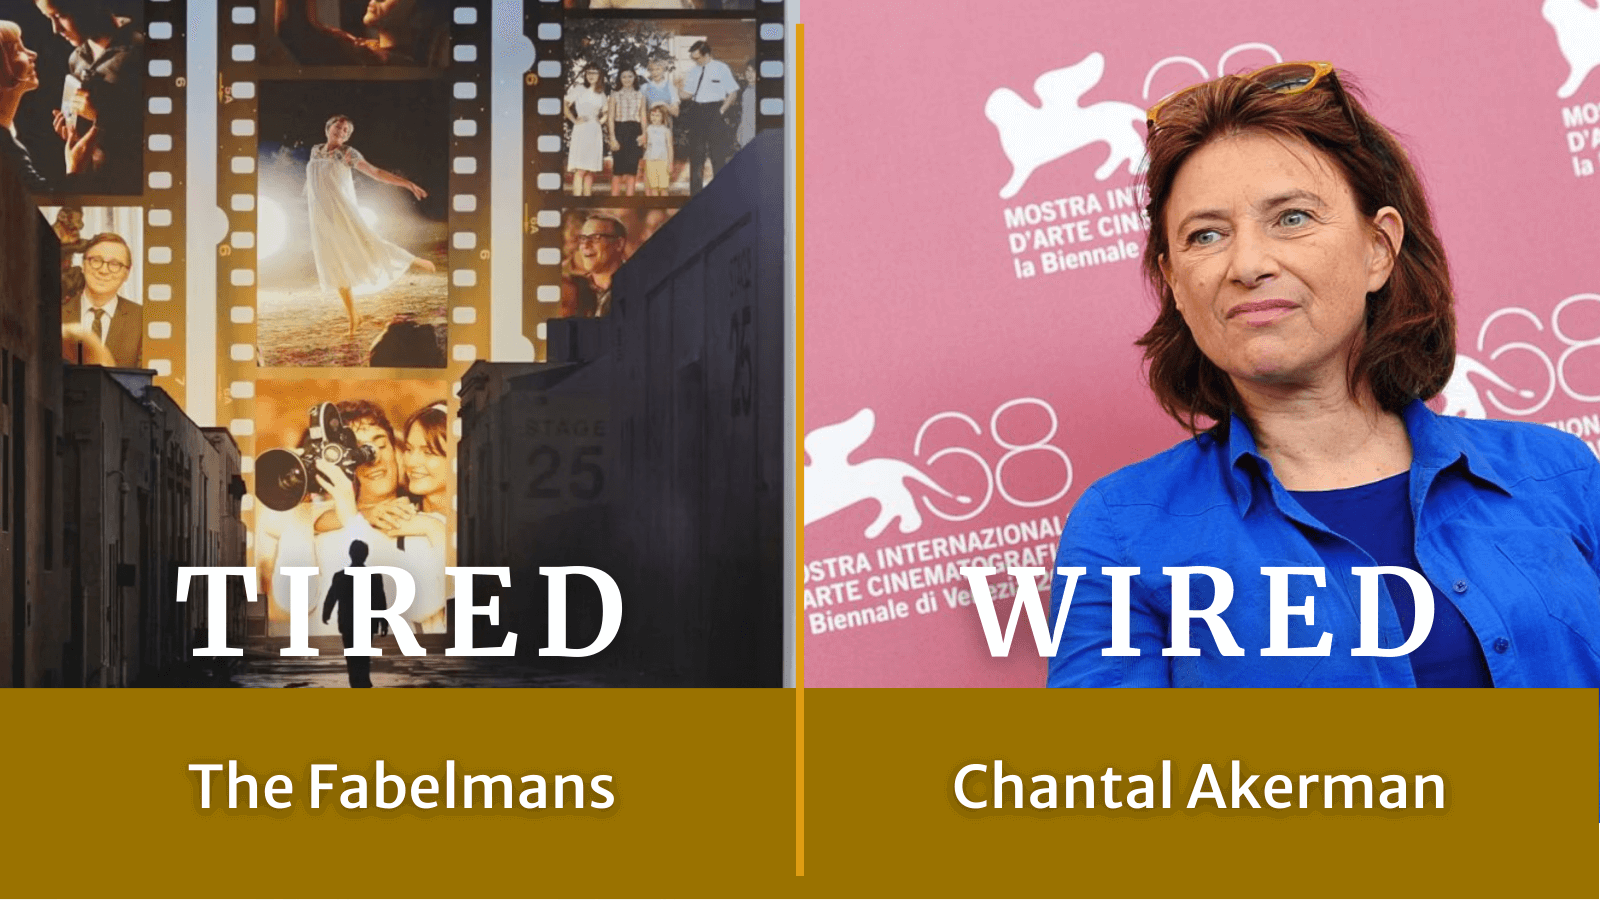 Tired: The Fabelmans. Wired: Chantal Akerman